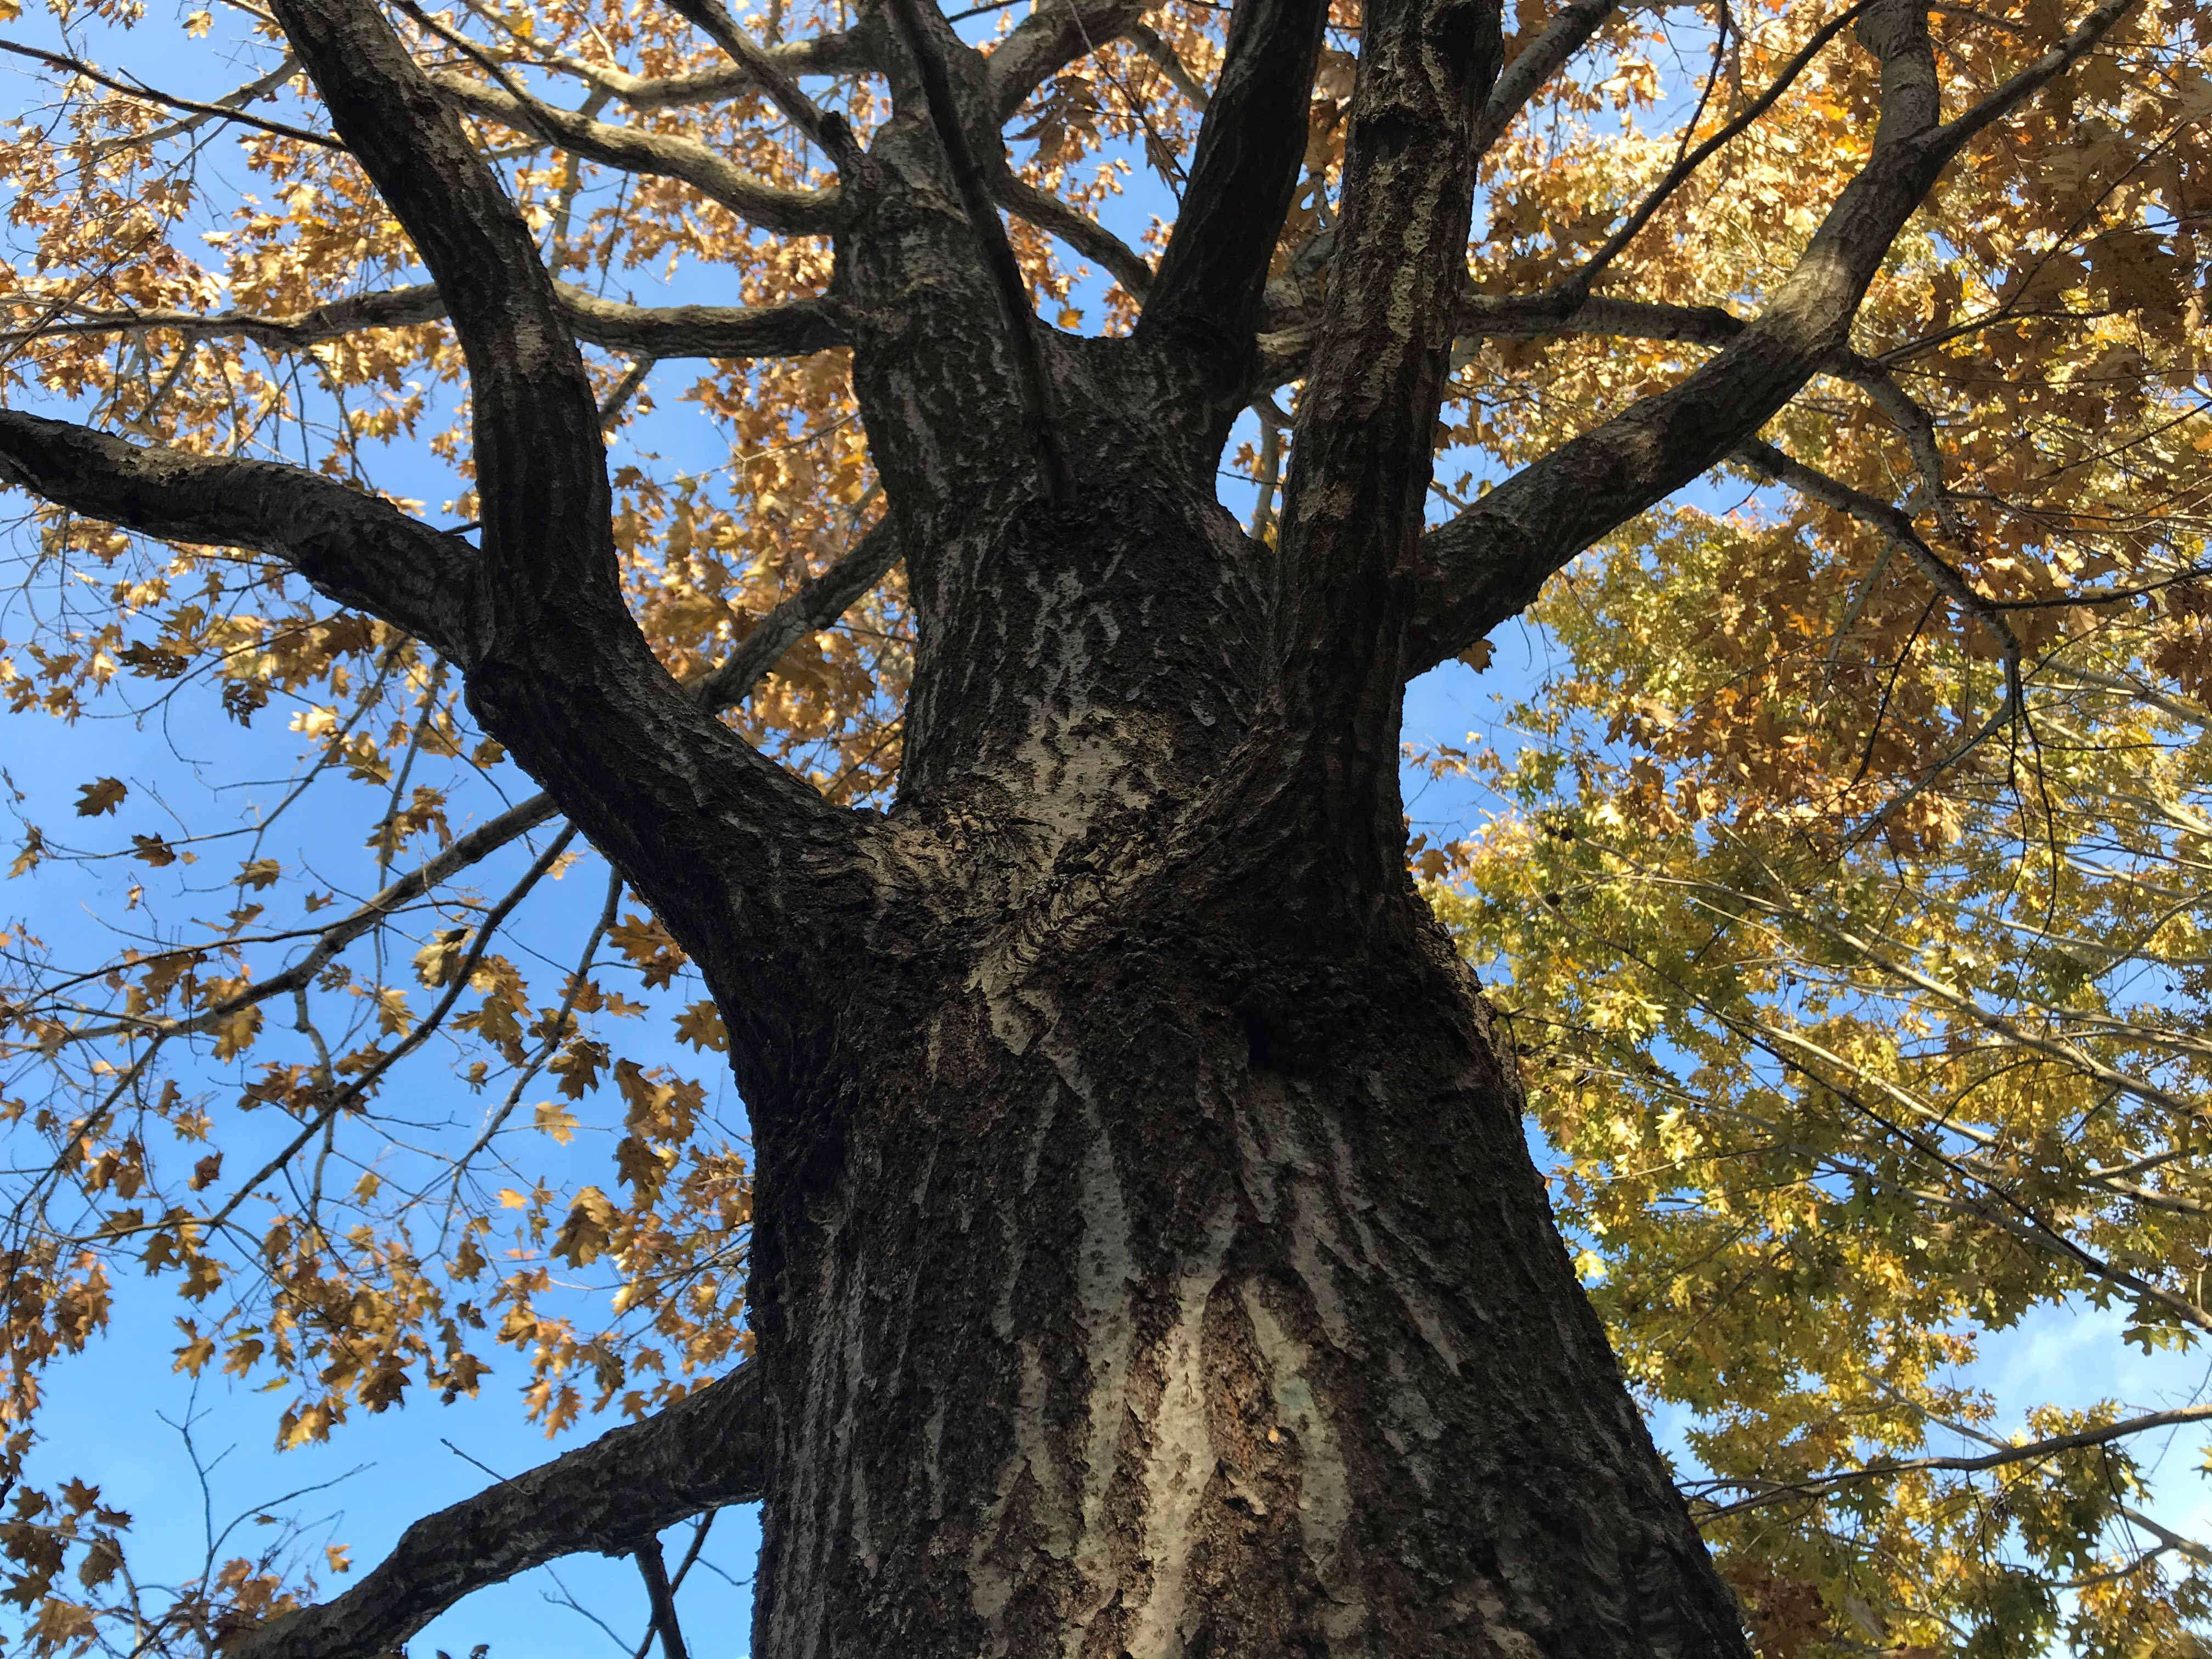 Showing the bark of Quercus rubra, the northern red oak. The tree can be found on the Walk Across Kentucky at The Arboretum. Photo provided by Emily Ellingson